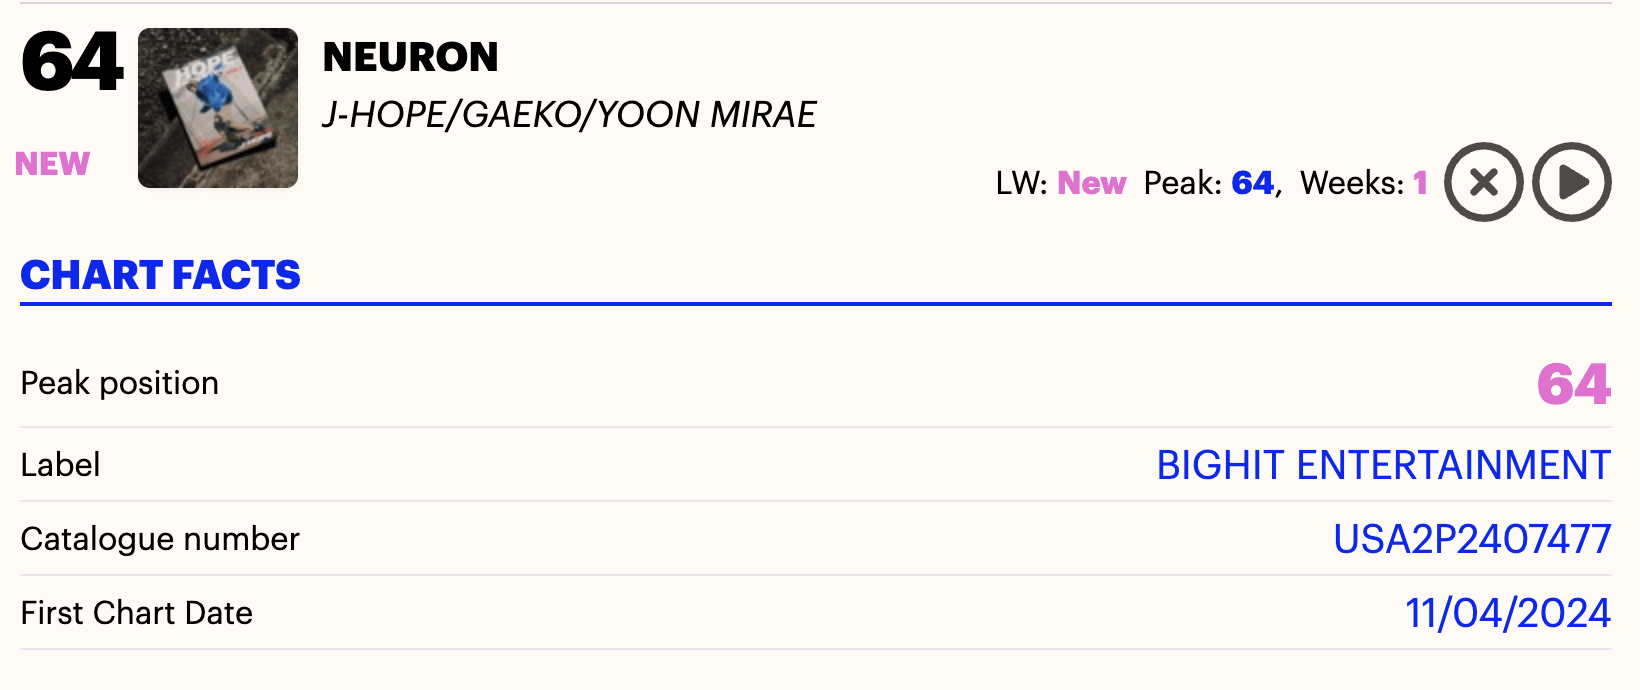 j-hope's "NEURON (with Gaeko, yoonmirae)" debuts at #67 on this week's UK Official Singles Chart - 050424